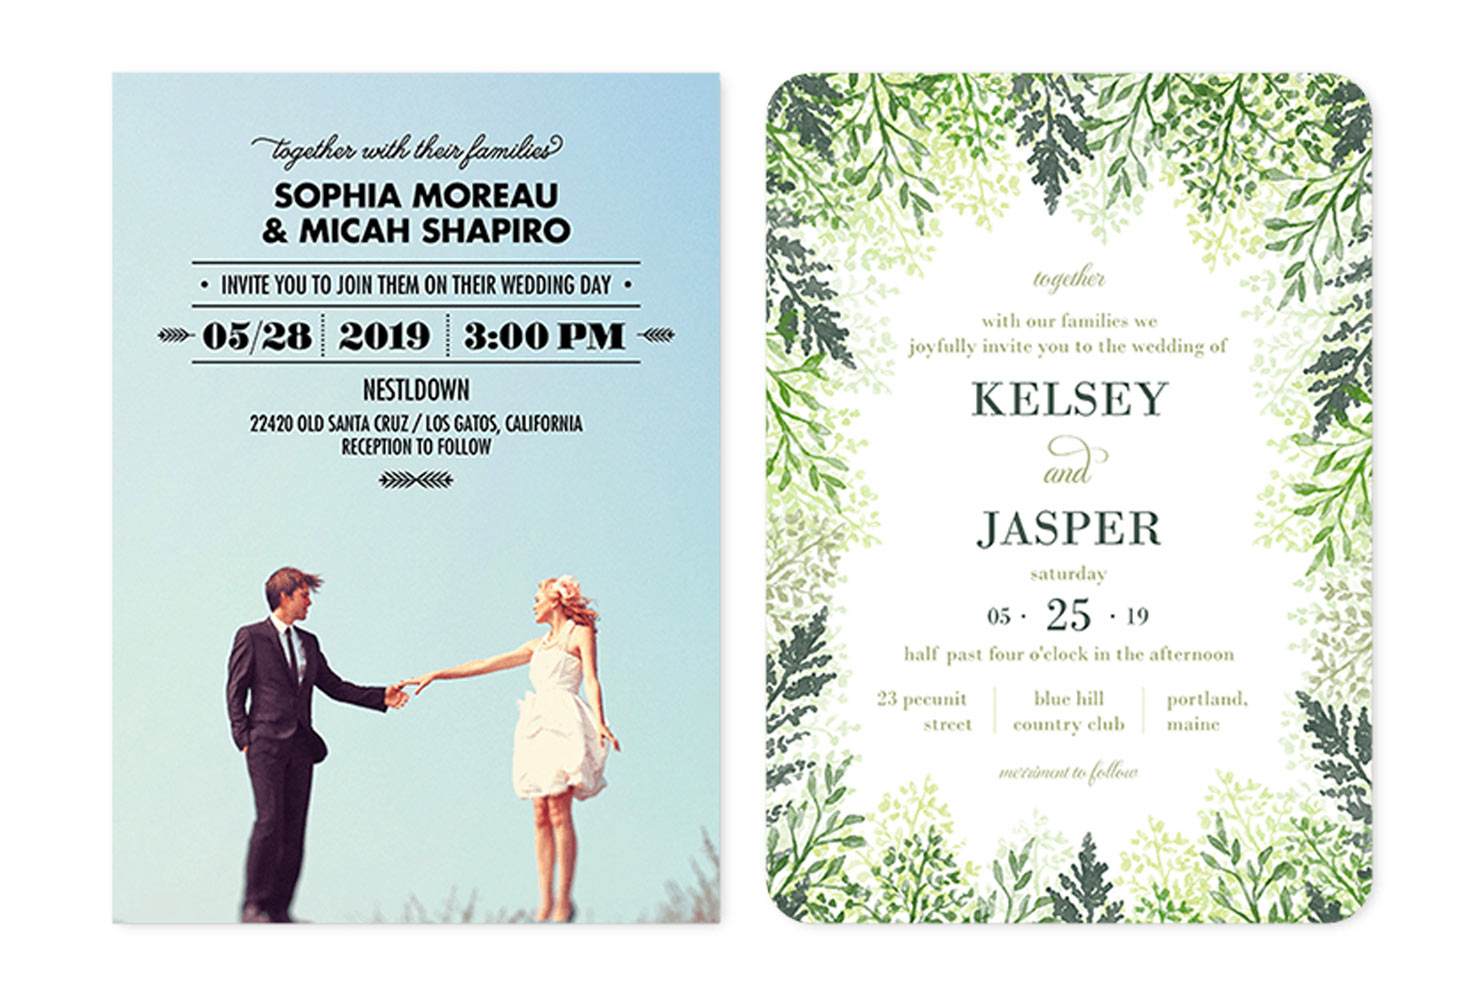 79 Special Facebook Wedding Invitation Template Favorite Photo With for dimensions 1480 X 1000